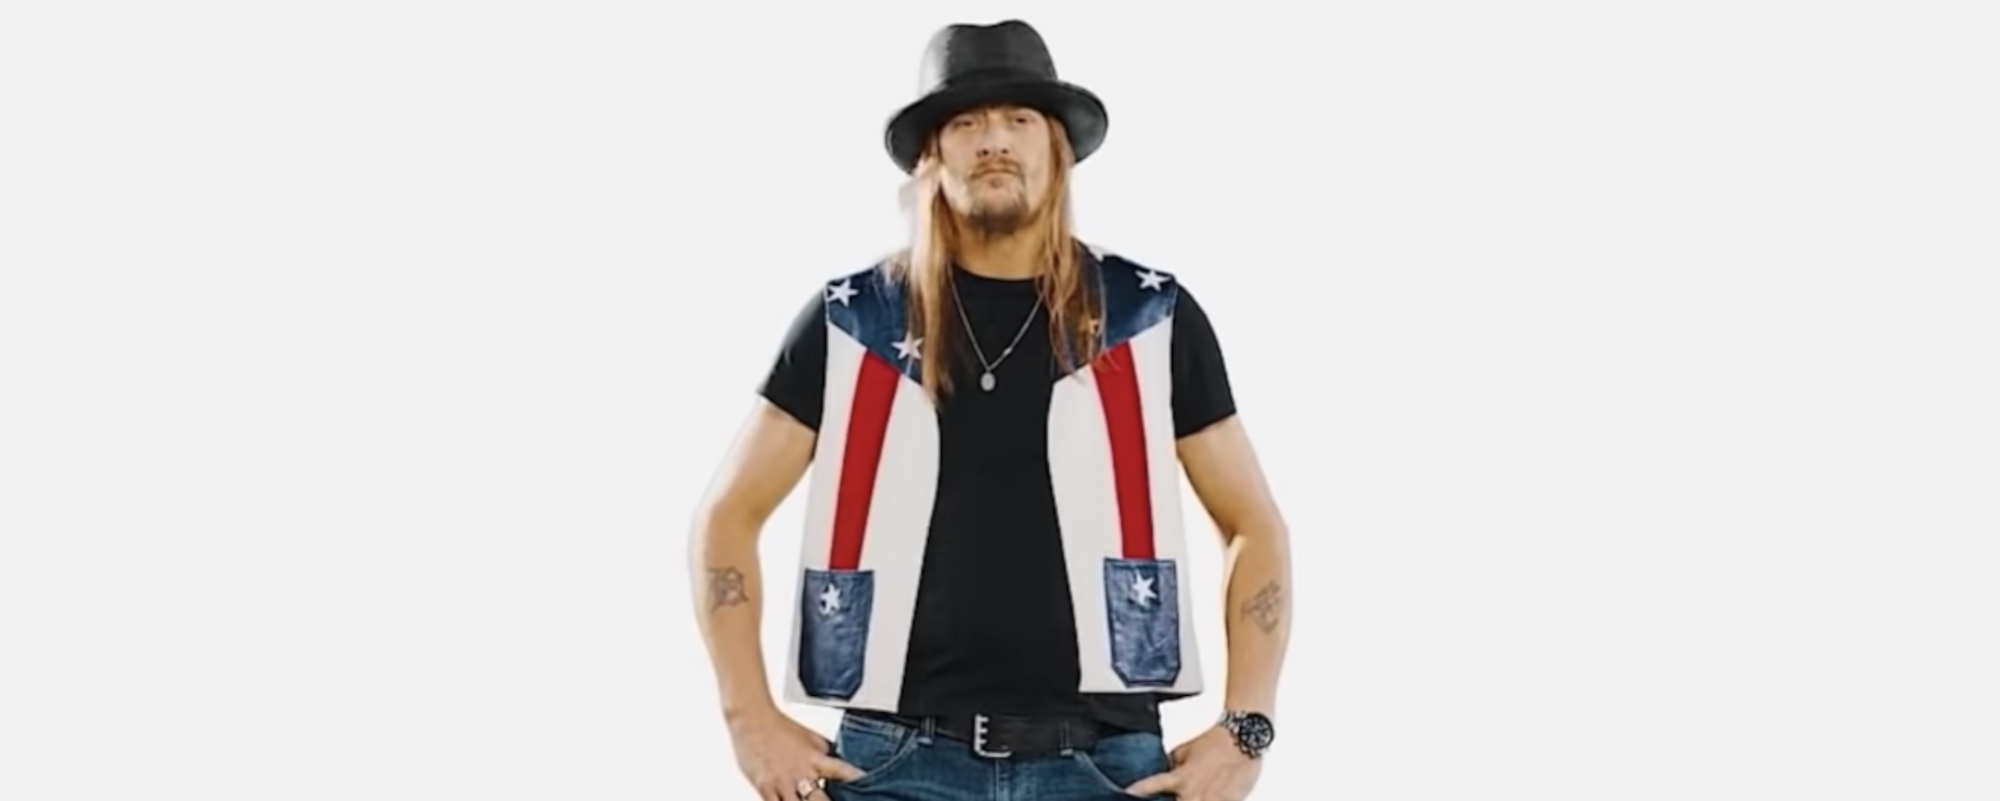 The Latest Kid Rock Rant is Quite Brash